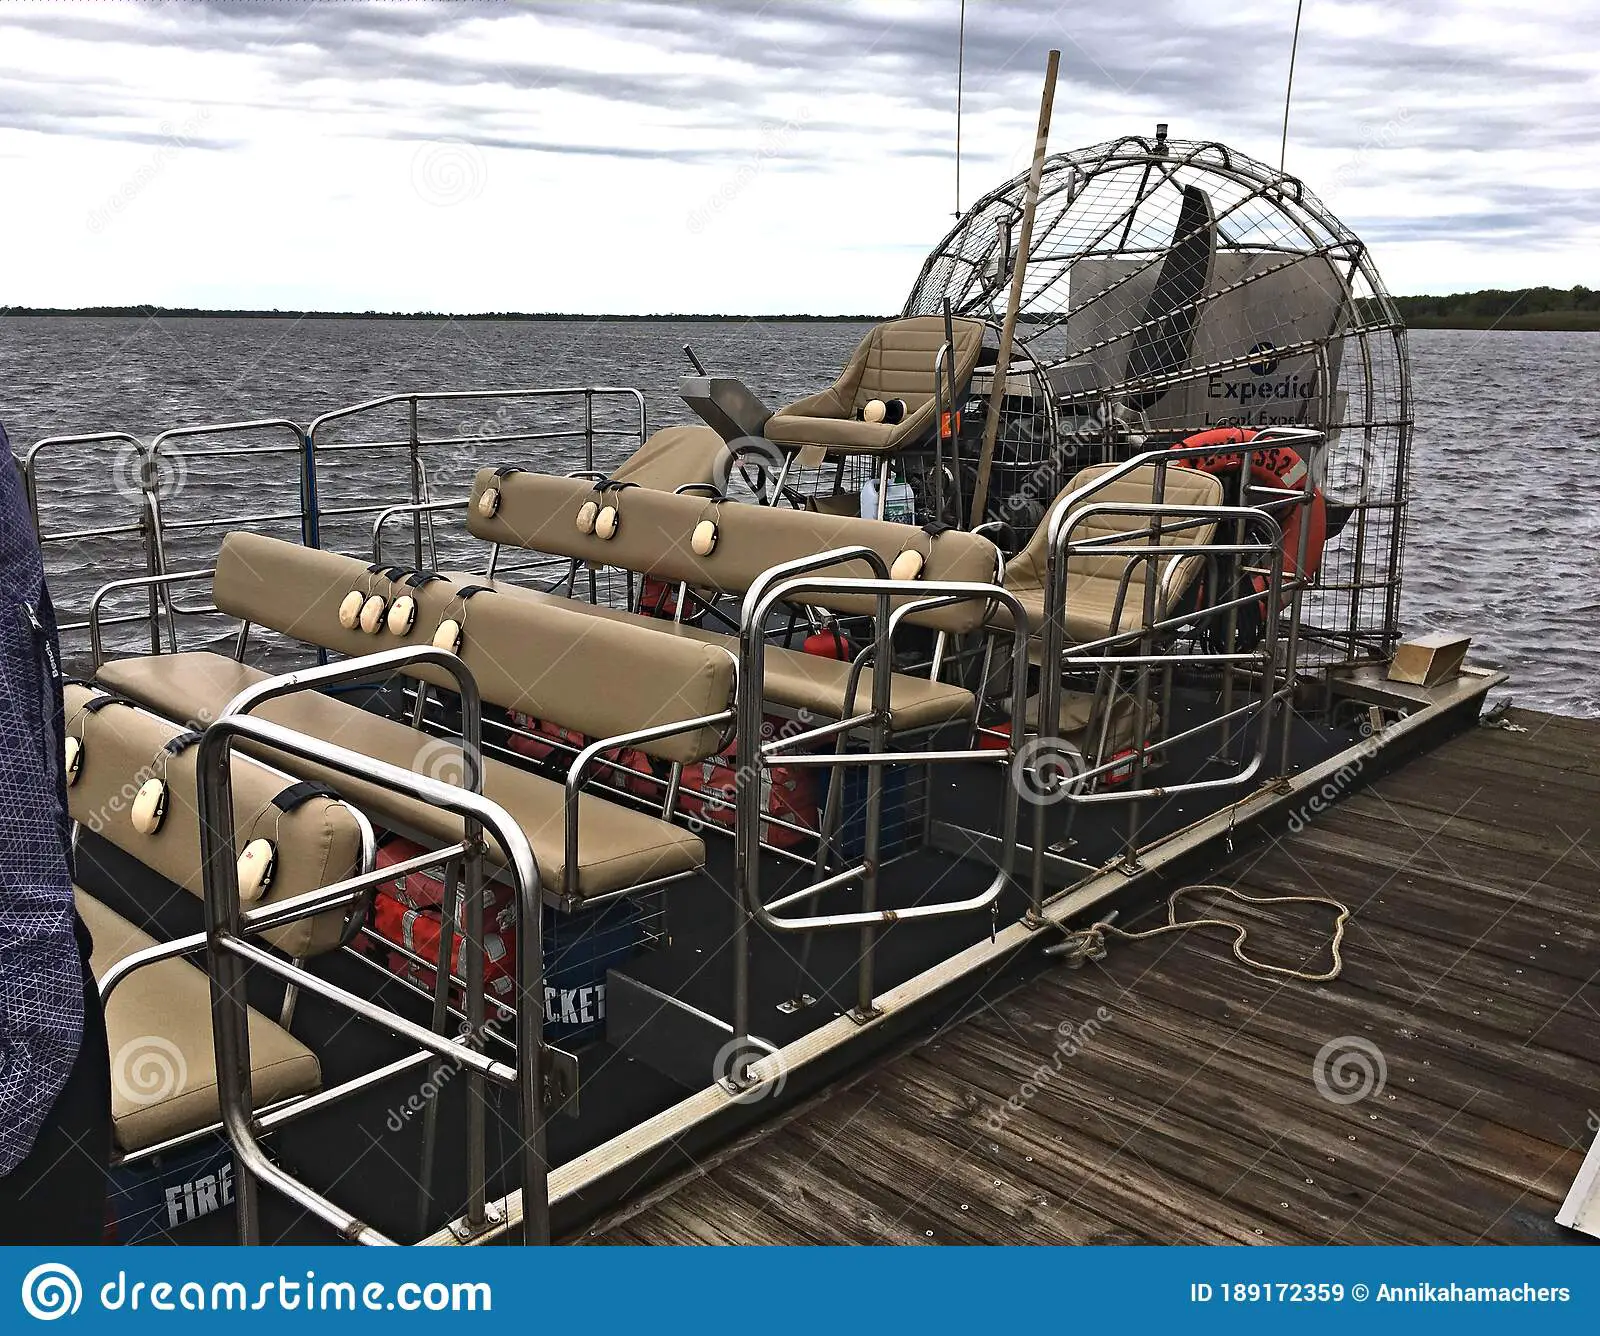 Fanboat Swamp Boat Airboat Near Orlando, Florida On A Cloudy Day Ready ...